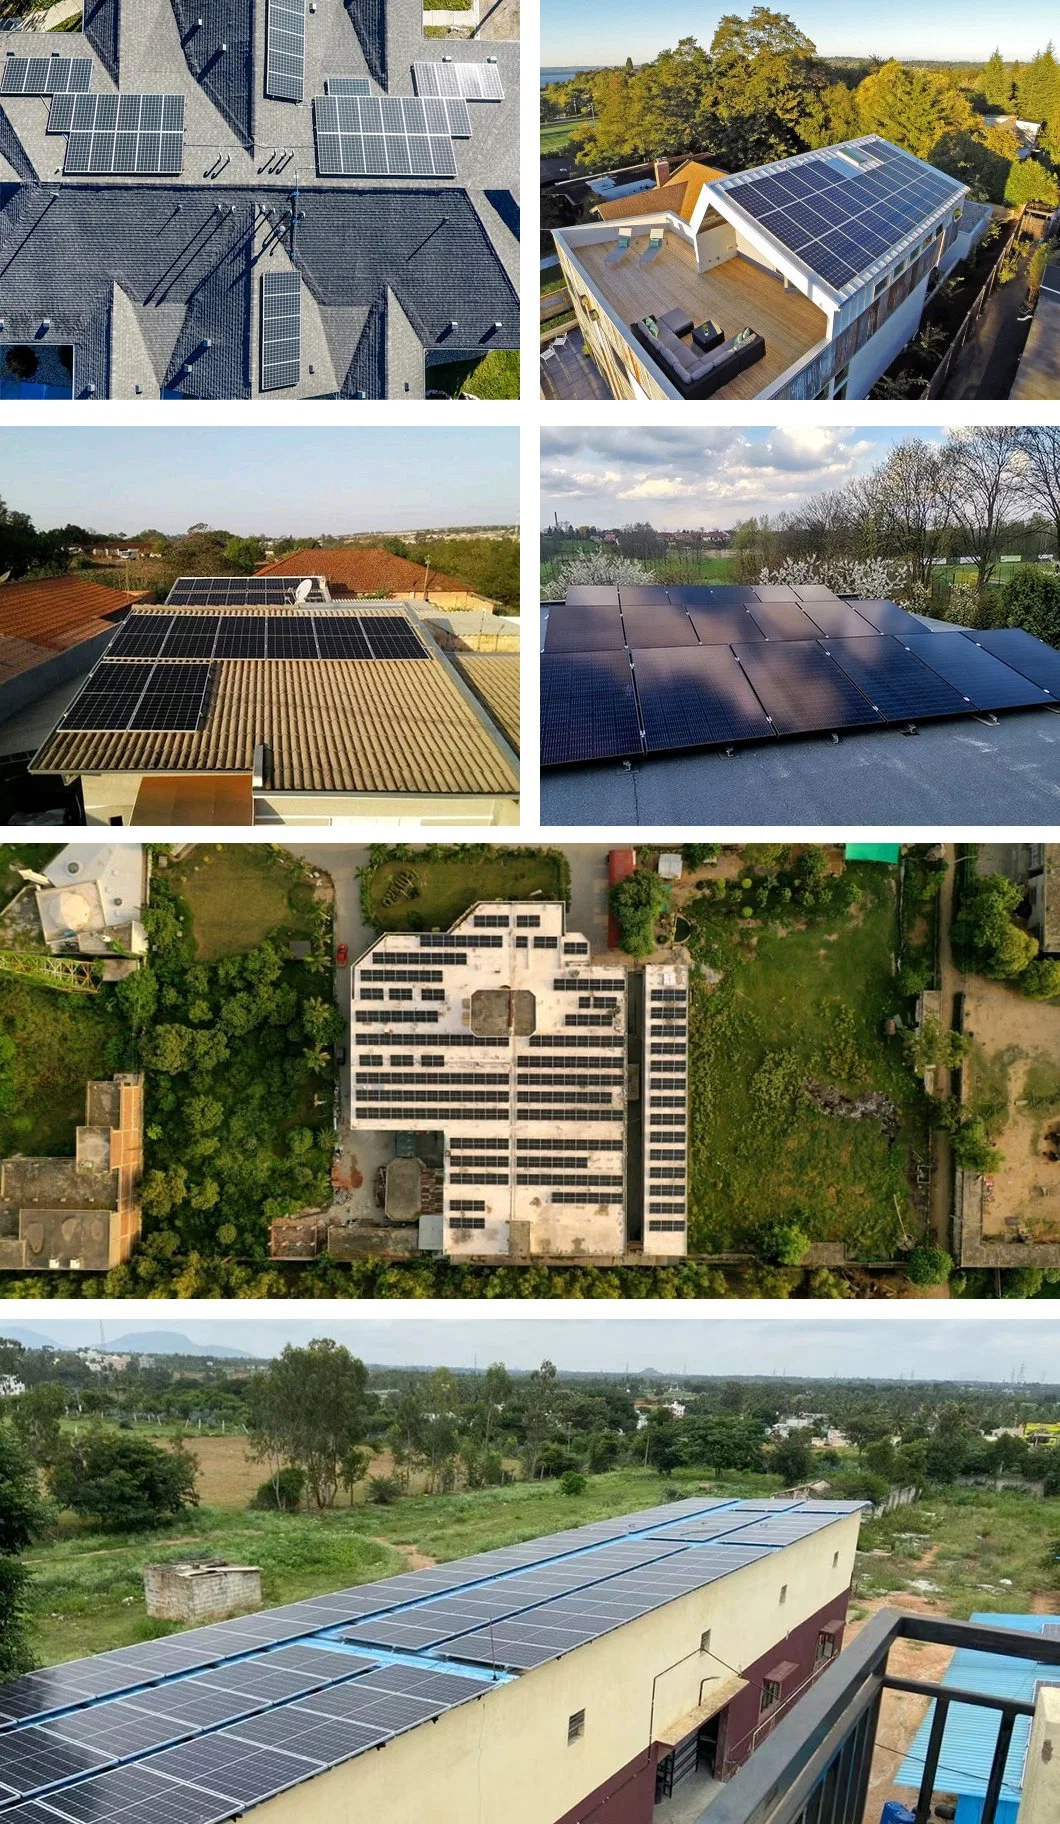 Residential 6kw 10kw 12kw Hybrid Photovoltaic Solar Energy System for House